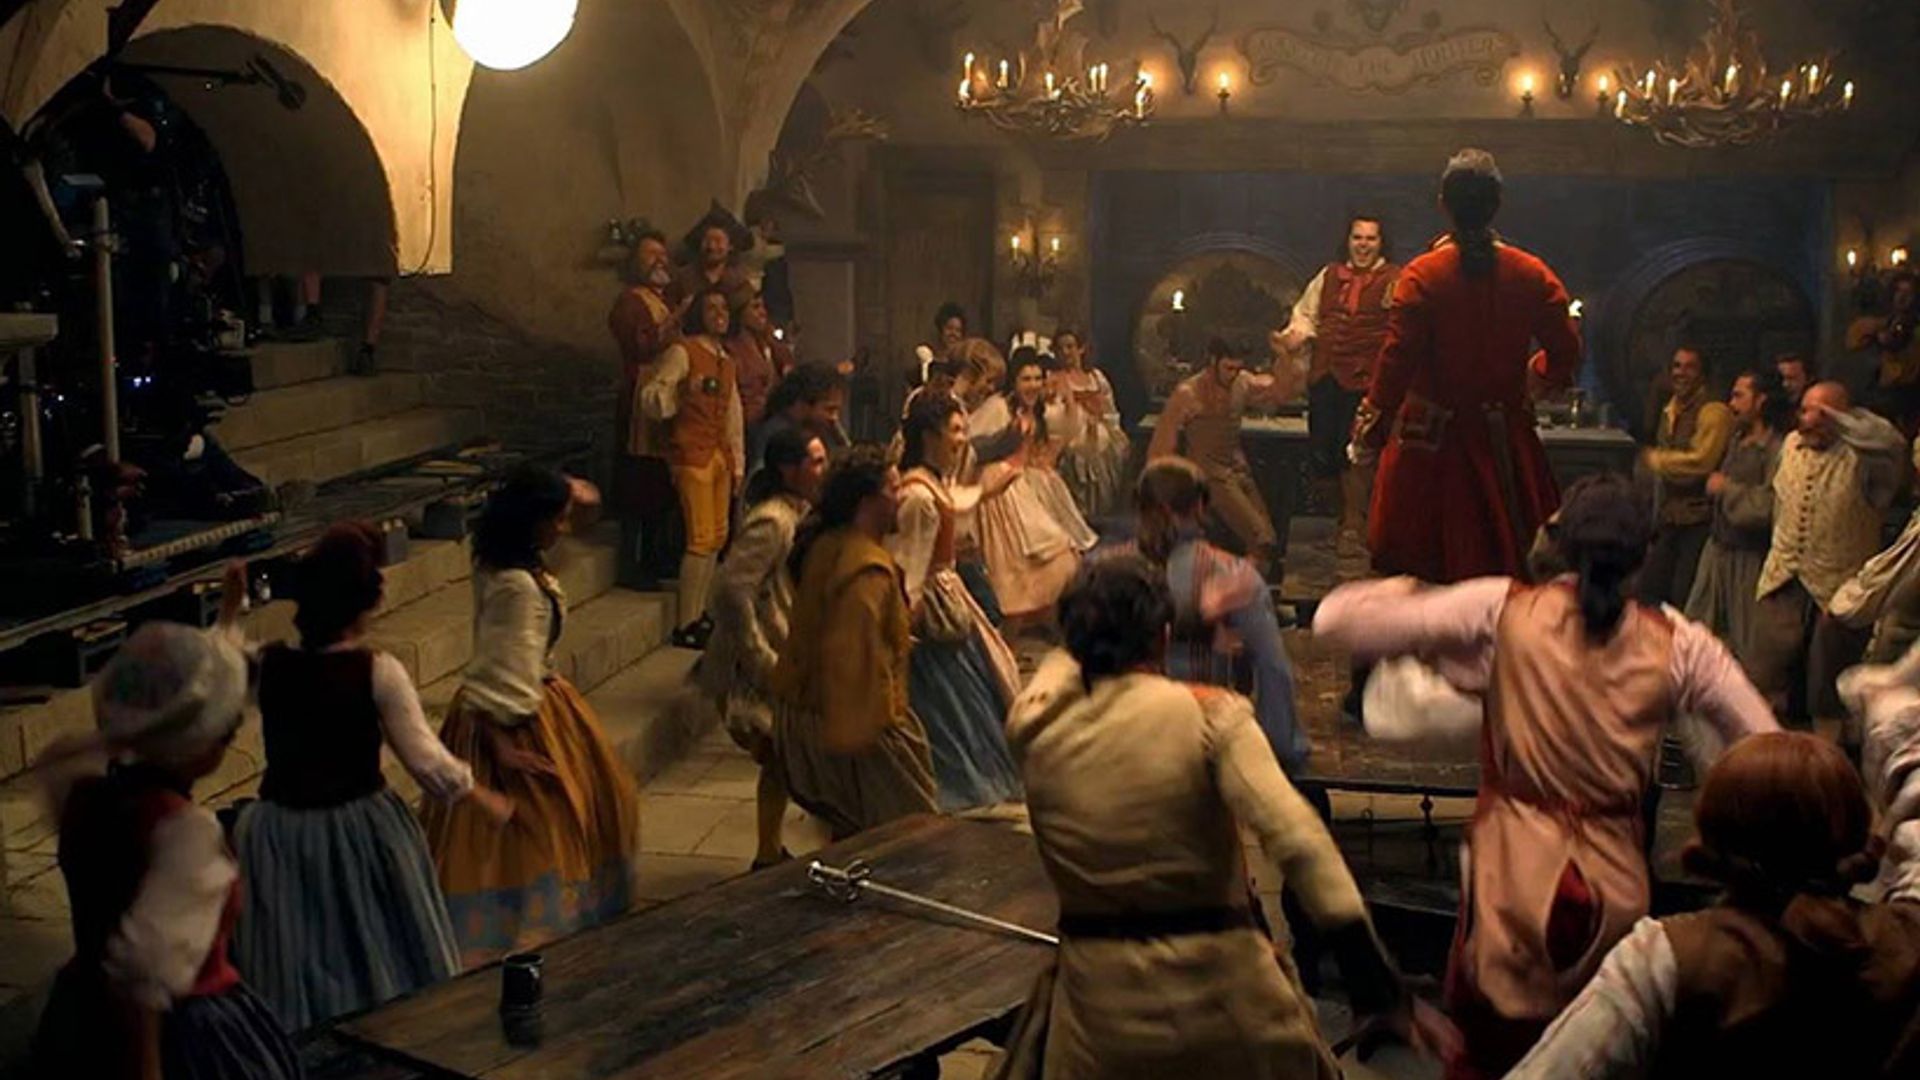 Attention Disney fans! Take a look at first photos of live-action Beauty and the Beast